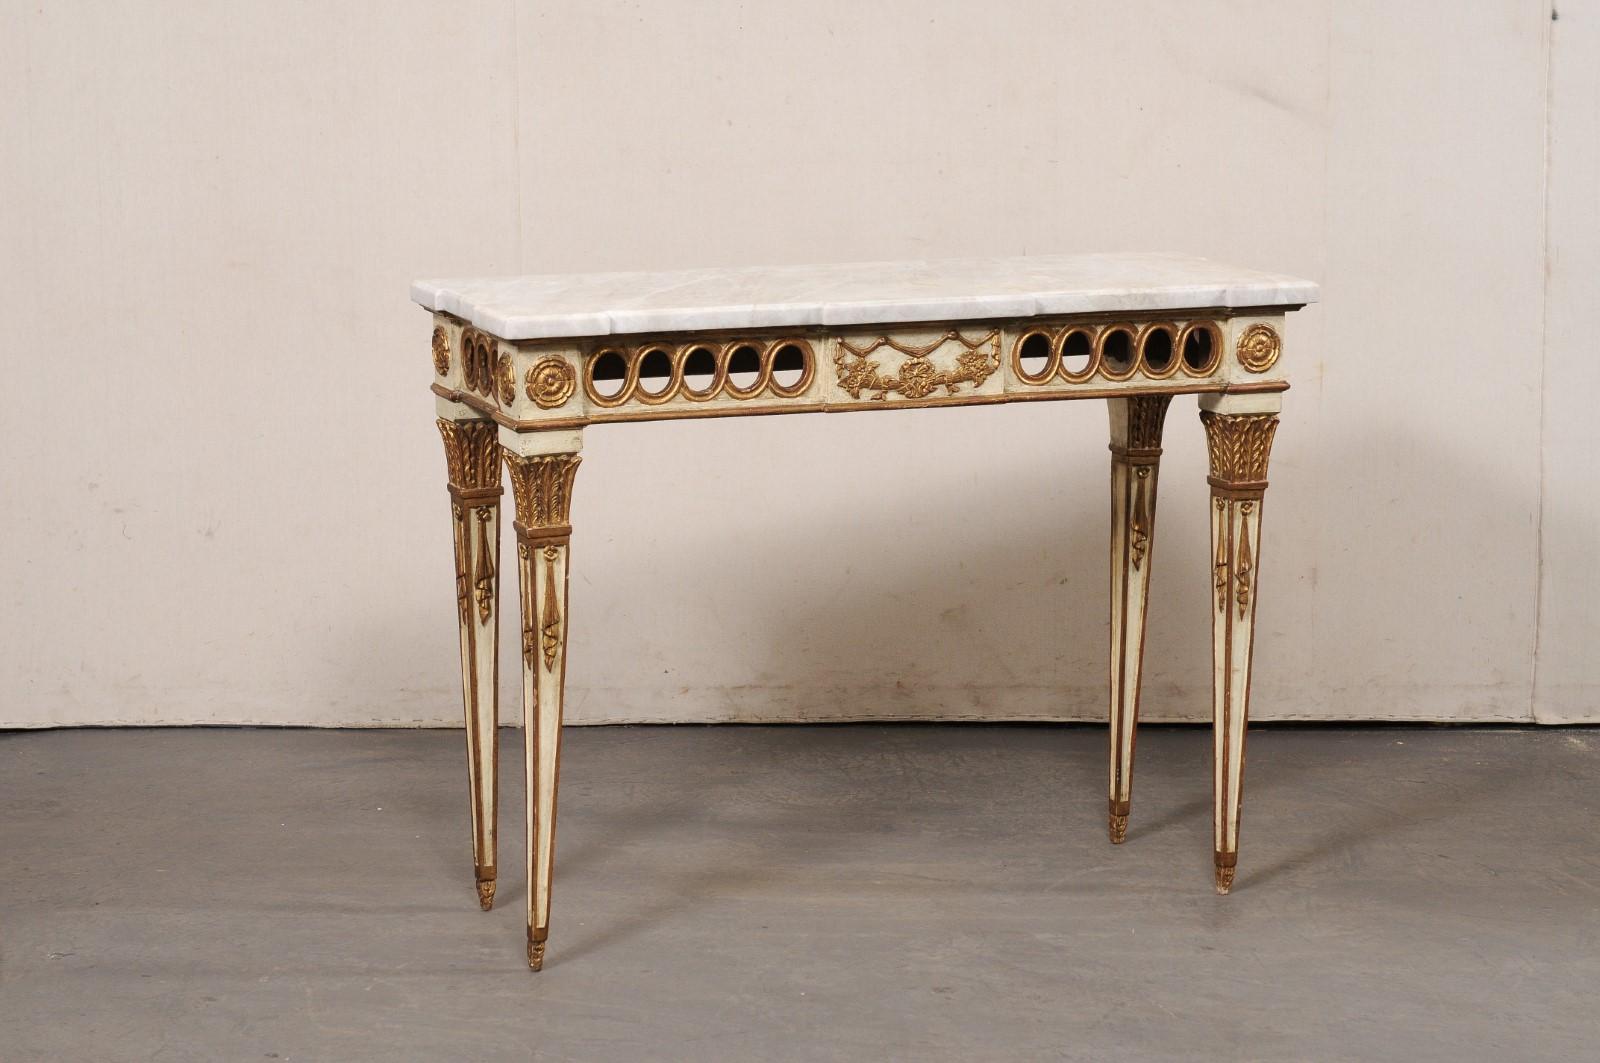 An Italian Neoclassic style carved-wood console, with original finish and a new quartzite top, from the mid 20th century. This vintage table from Italy has a new custom 